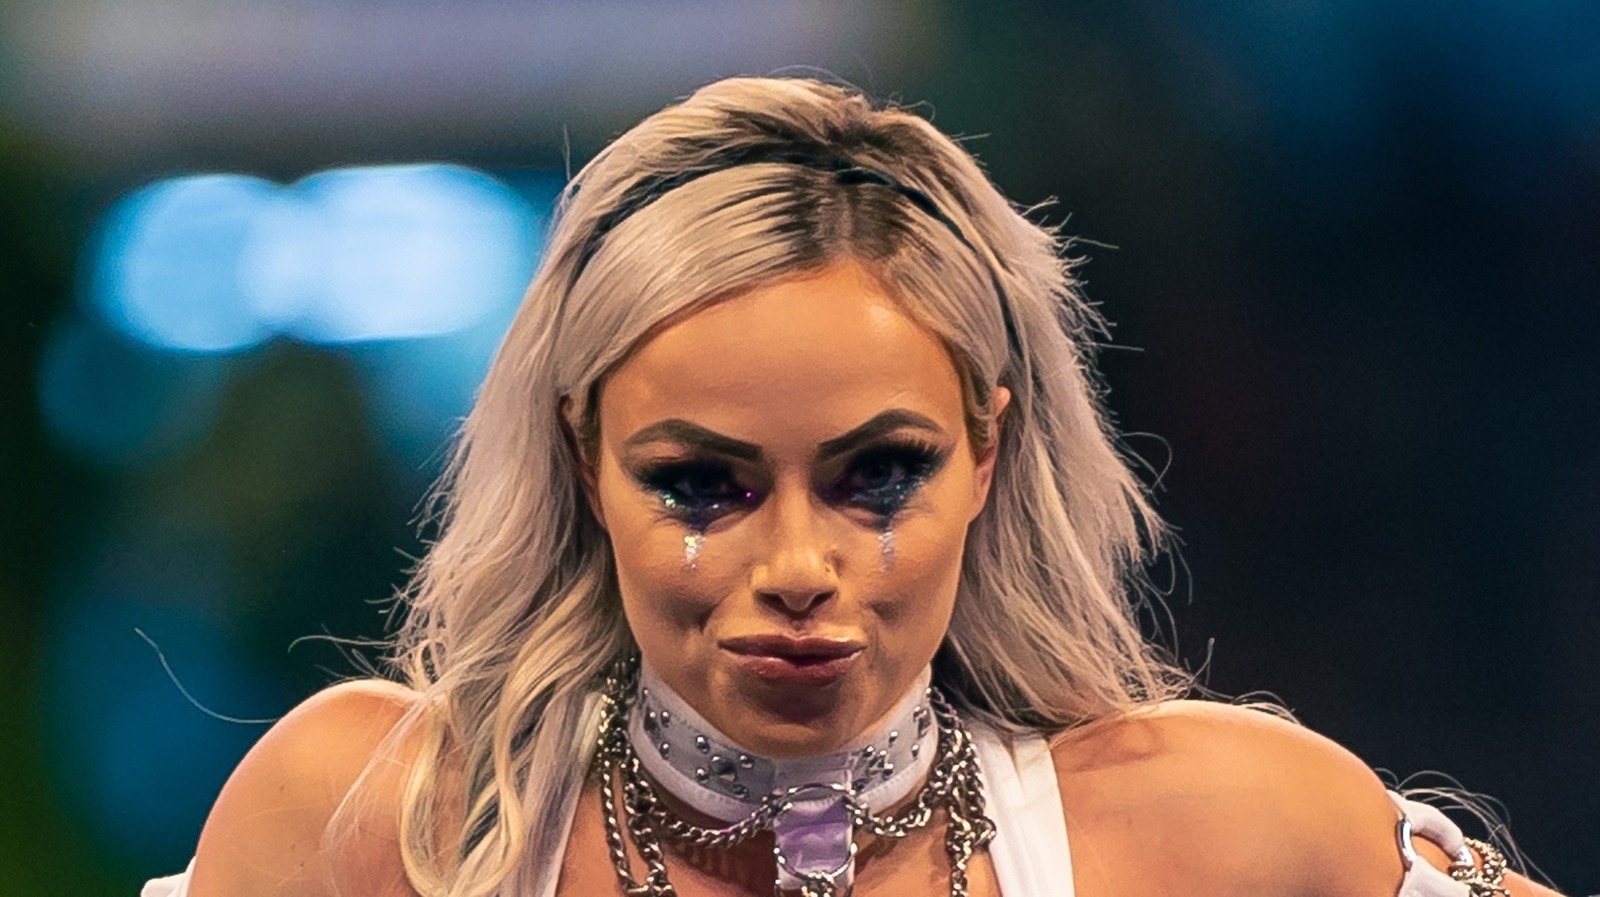 Backstage News On WWE Changing Plans For Liv Morgan On SmackDown